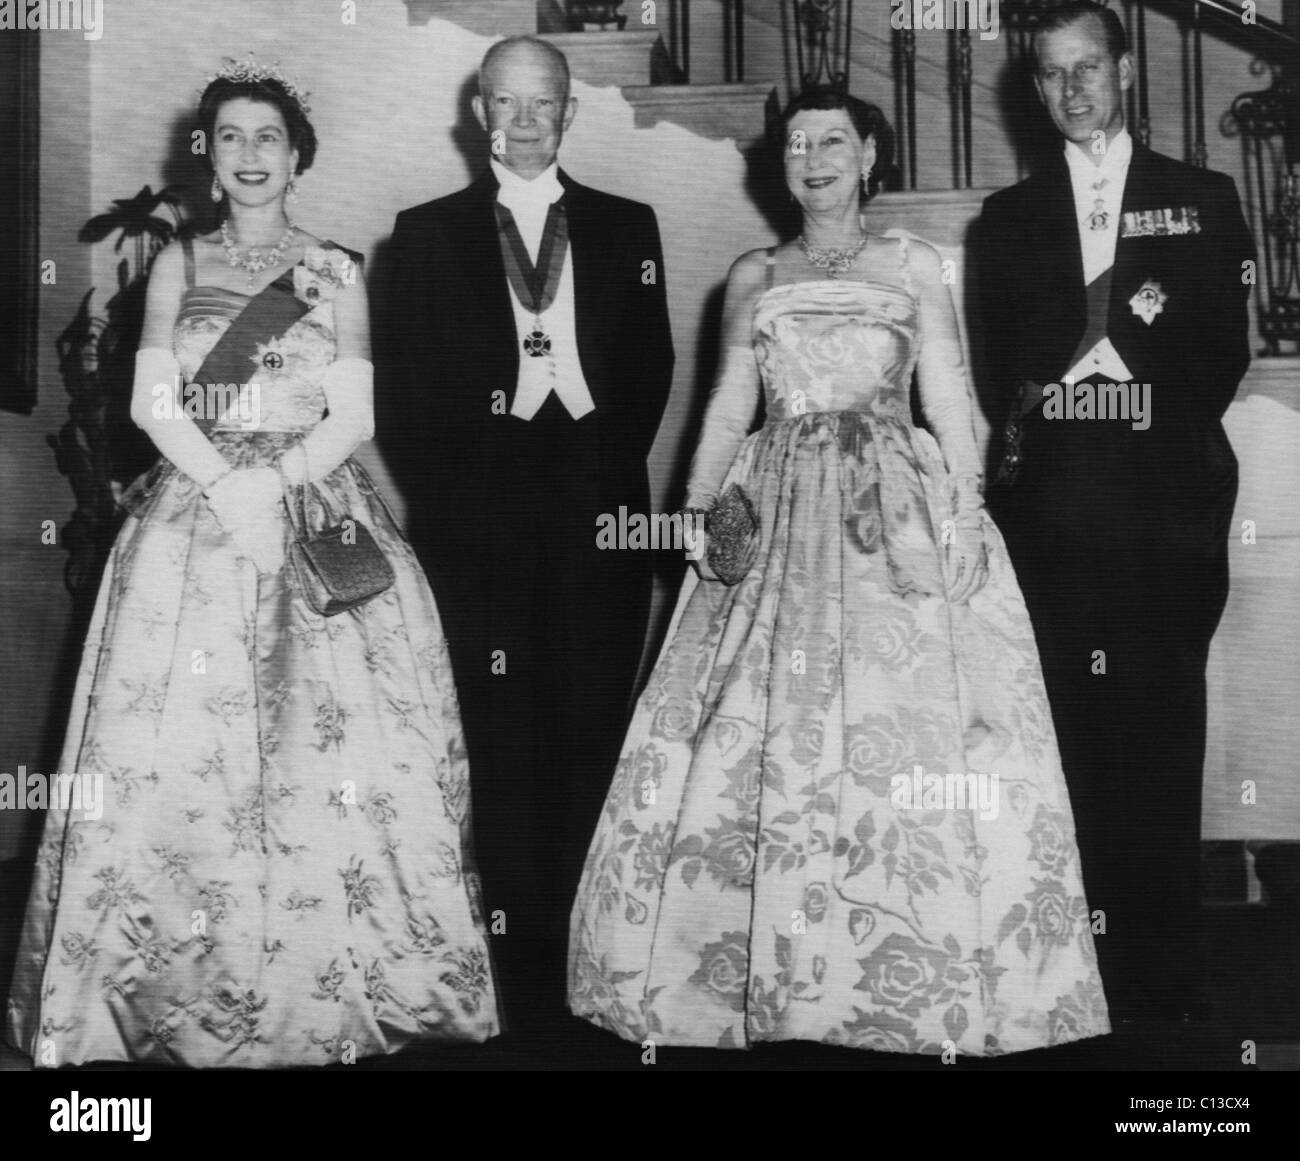 President Dwight D. Eisenhower, before the state dinner at the White House with Royal guests, left to right: Queen Elizabeth II, the Queen of the United Kingdom; President Eisenhower; First Lady Mamie Eisenhower; Prince Philip, the Duke of Edinburgh; at the White House, October 18, 1957. Stock Photo